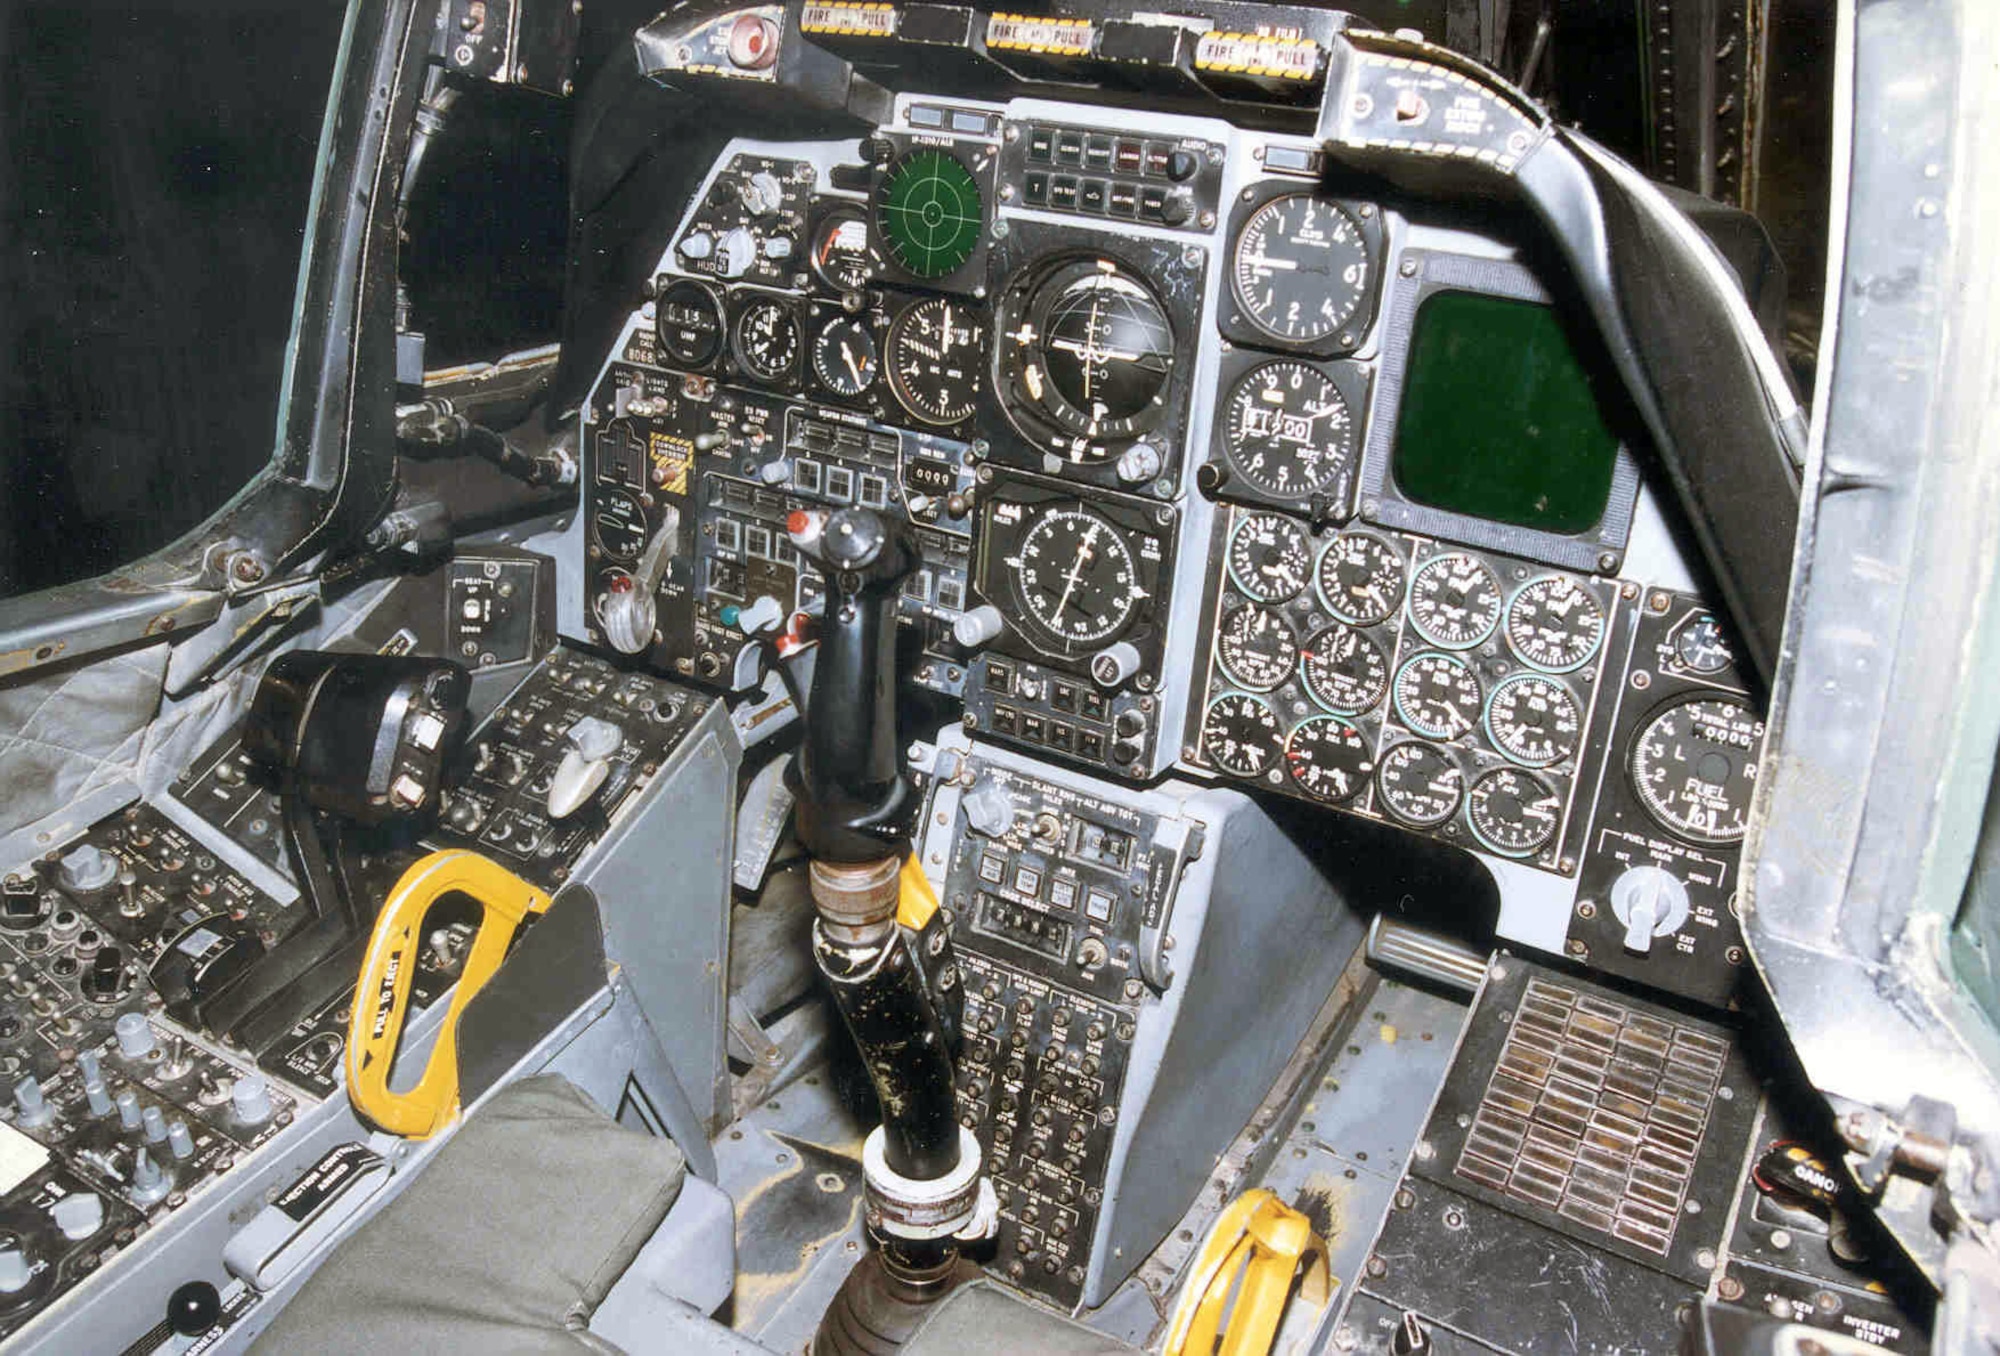 DAYTON, Ohio - Fairchild Republic A-10A Thunderbolt II cockpit at the National Museum of the U.S. Air Force. (U.S. Air Force photo)